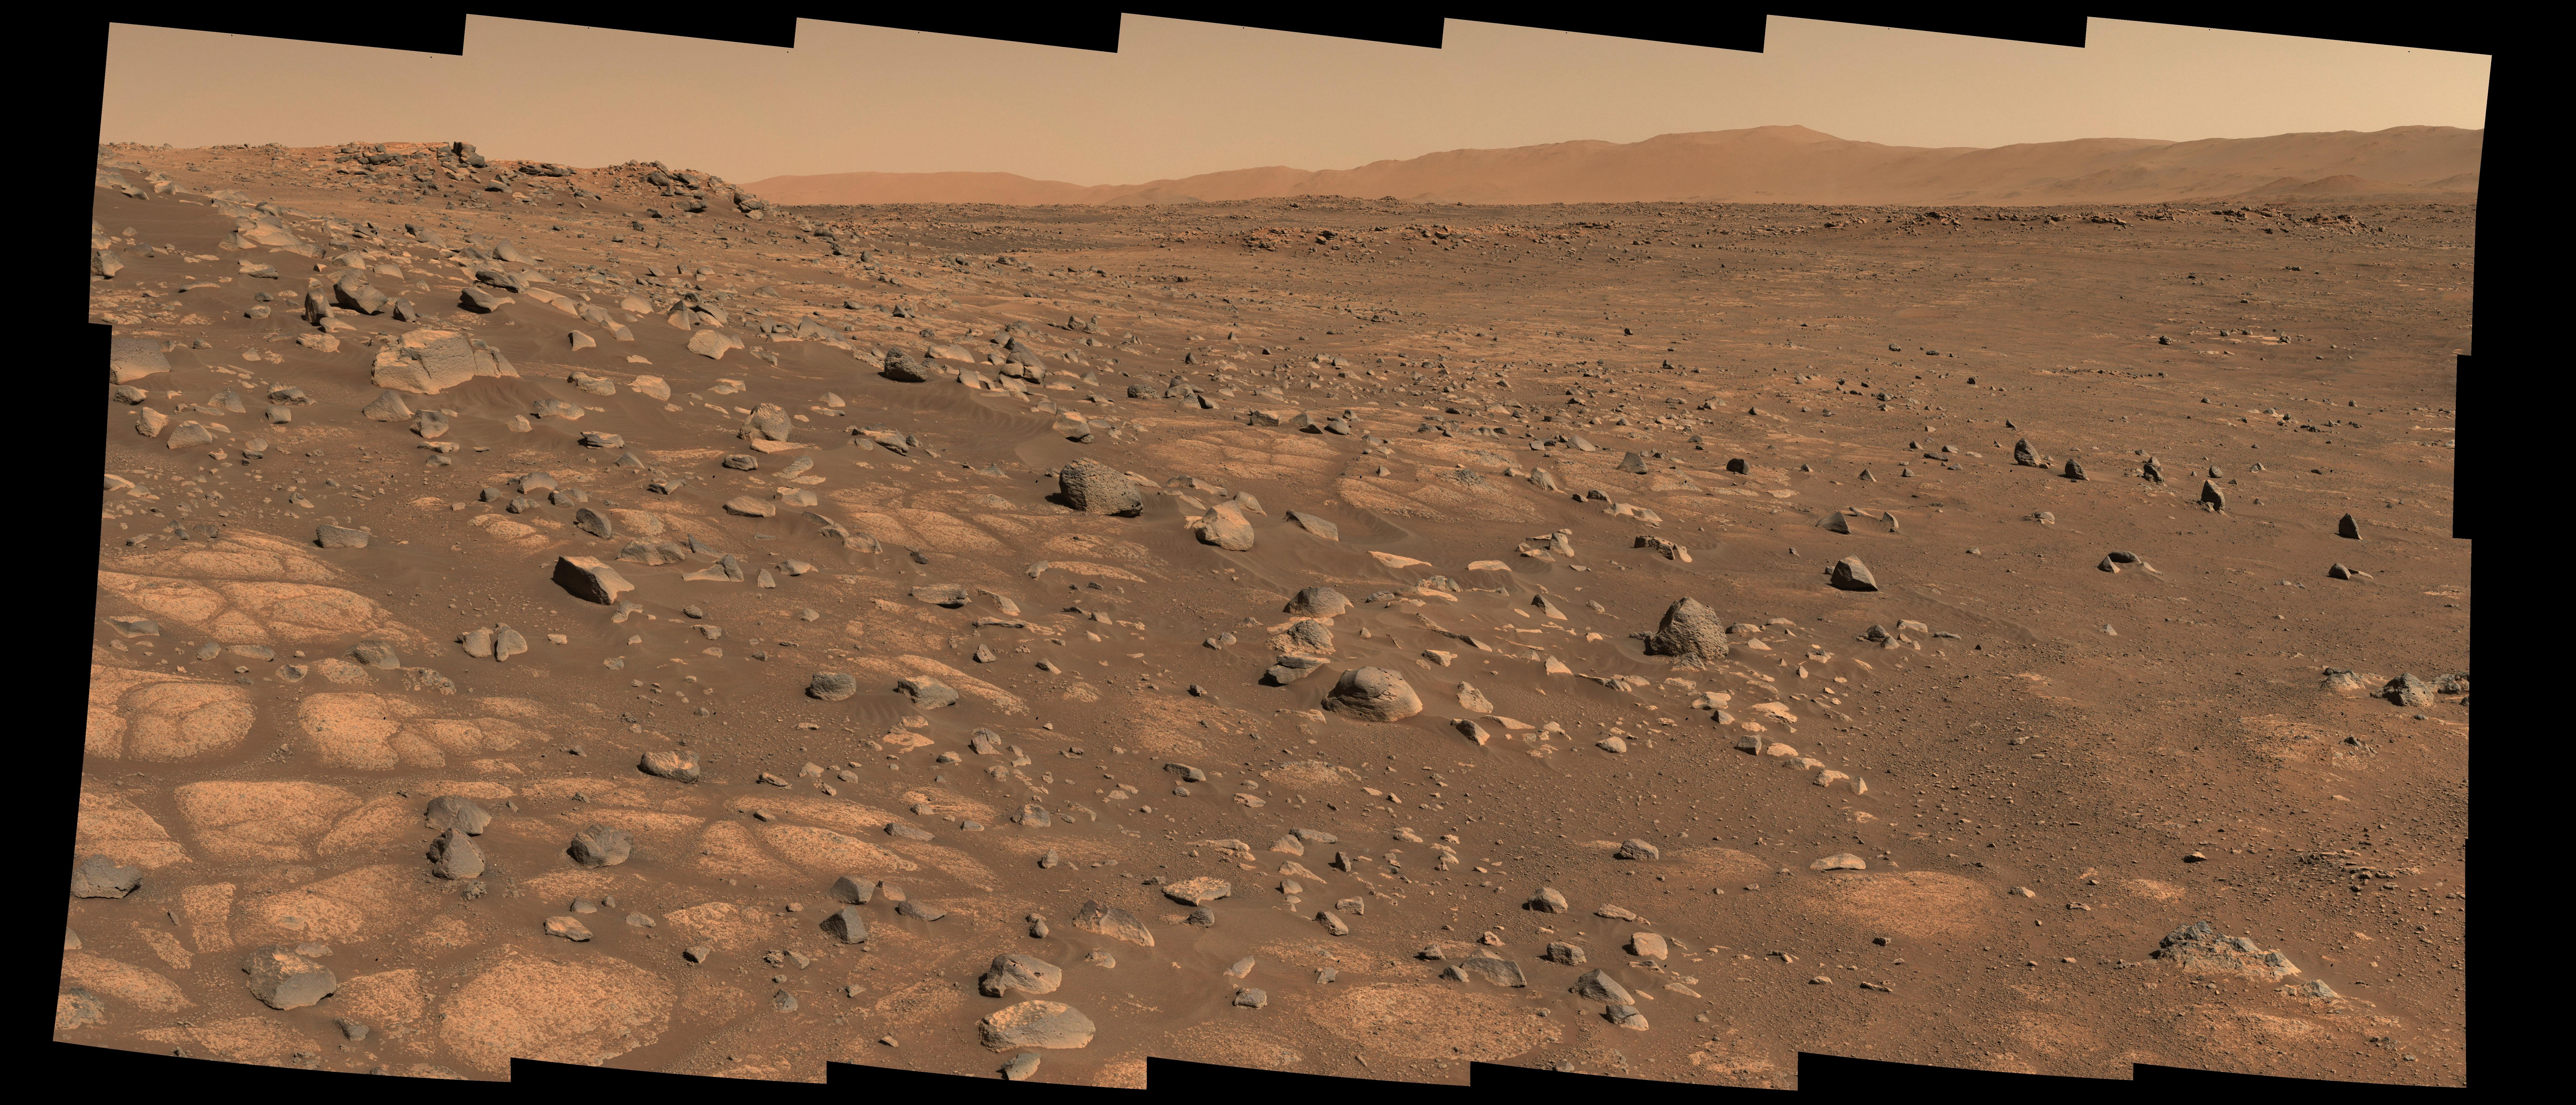 The rocky, orange-brown landscape of Mars appears, with a small ridge on the horizon and a hazy sky.